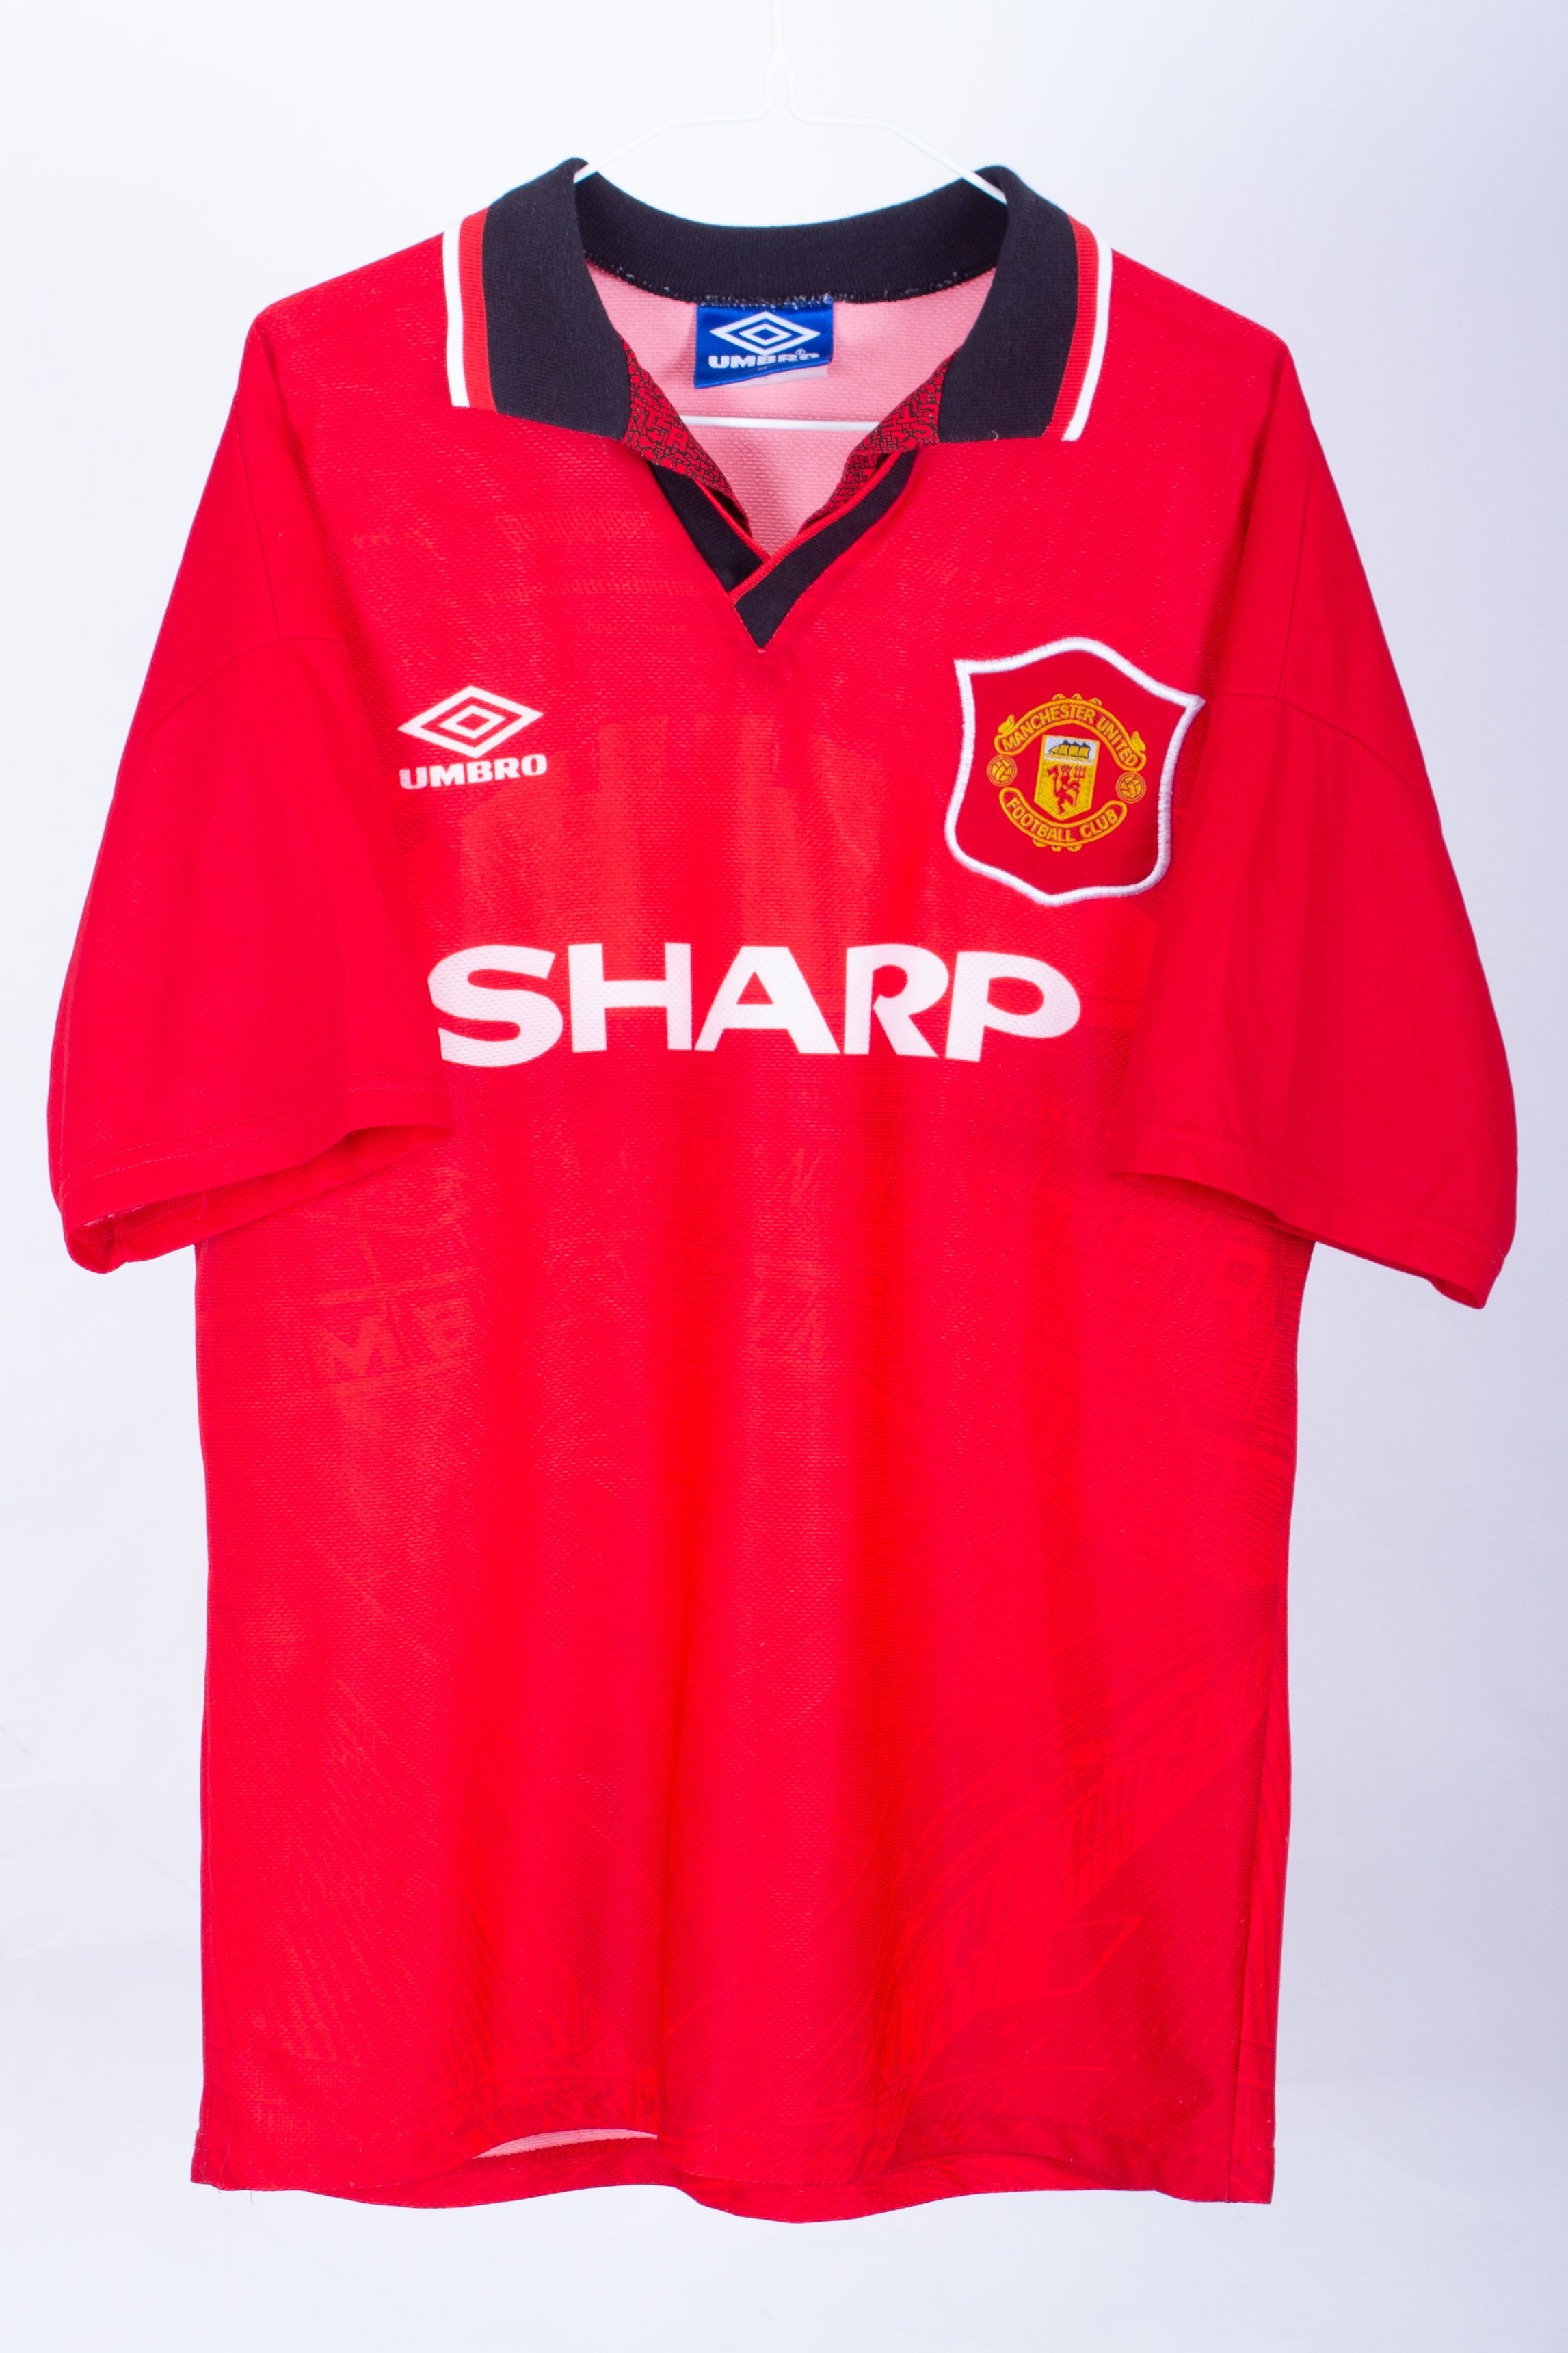 Vintage Manchester United Shirt, Classic Football Shirt, Classic Premier League Football Shirt